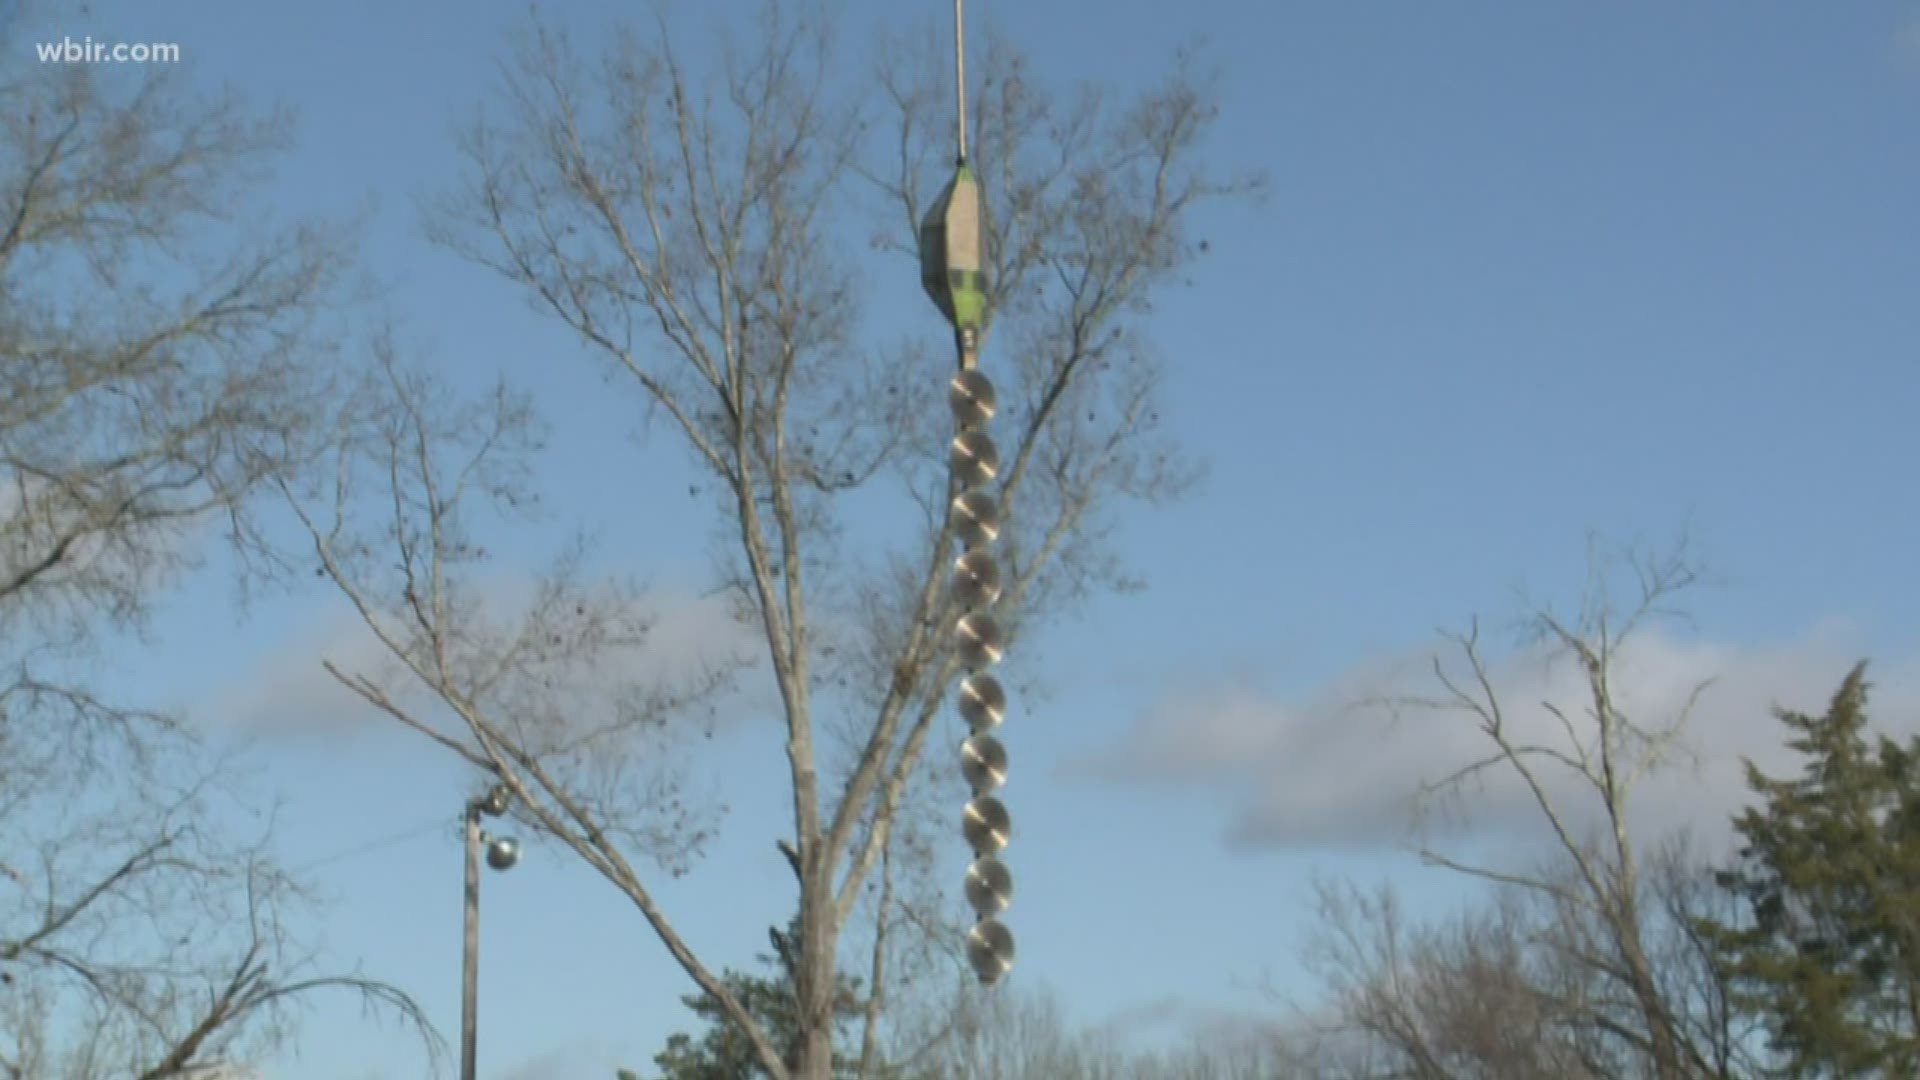 Crews use a saw attached to a helicopter to reach areas of trees they couldn't otherwise.